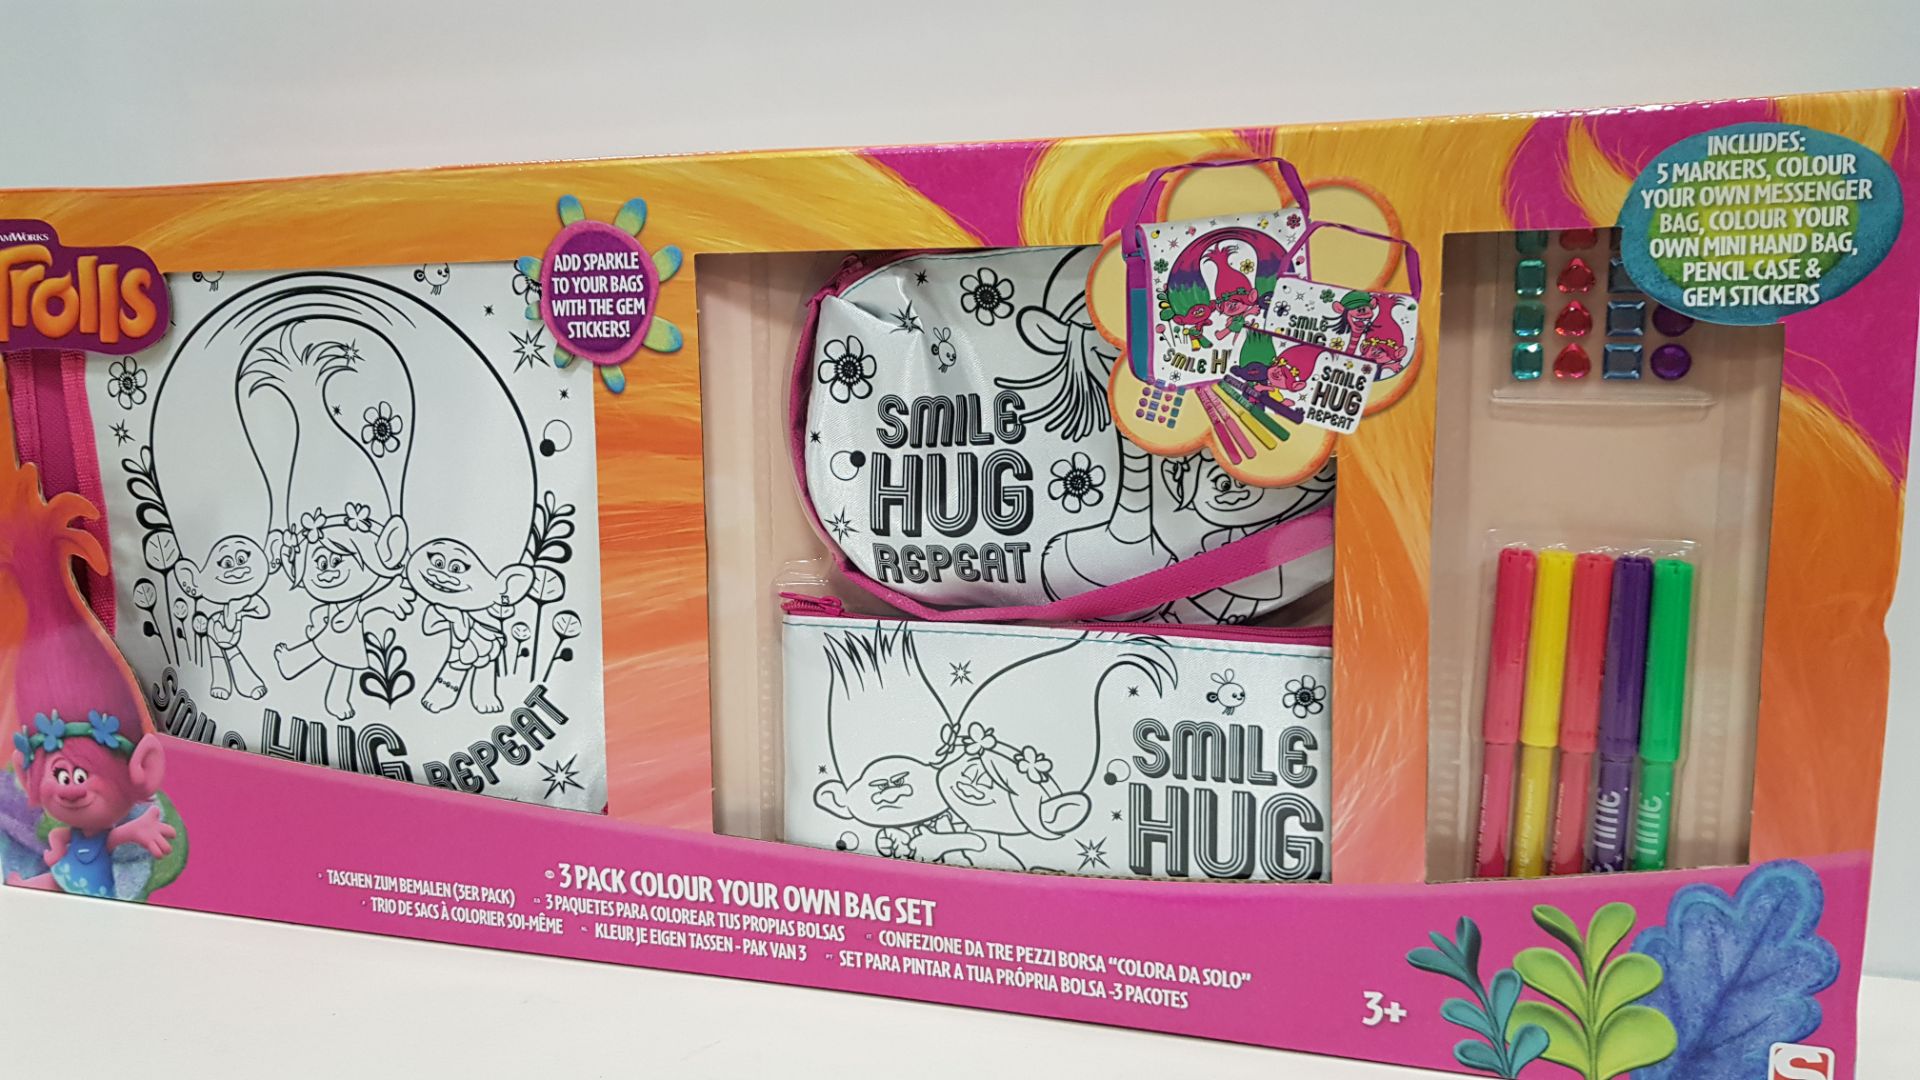 30 X BRAND NEW BOXED DREAMWORKS TROLLS 3 PACK COLOUR YOUR OWN BAG SET - INCLUDES 5 MARKERS, BAG,